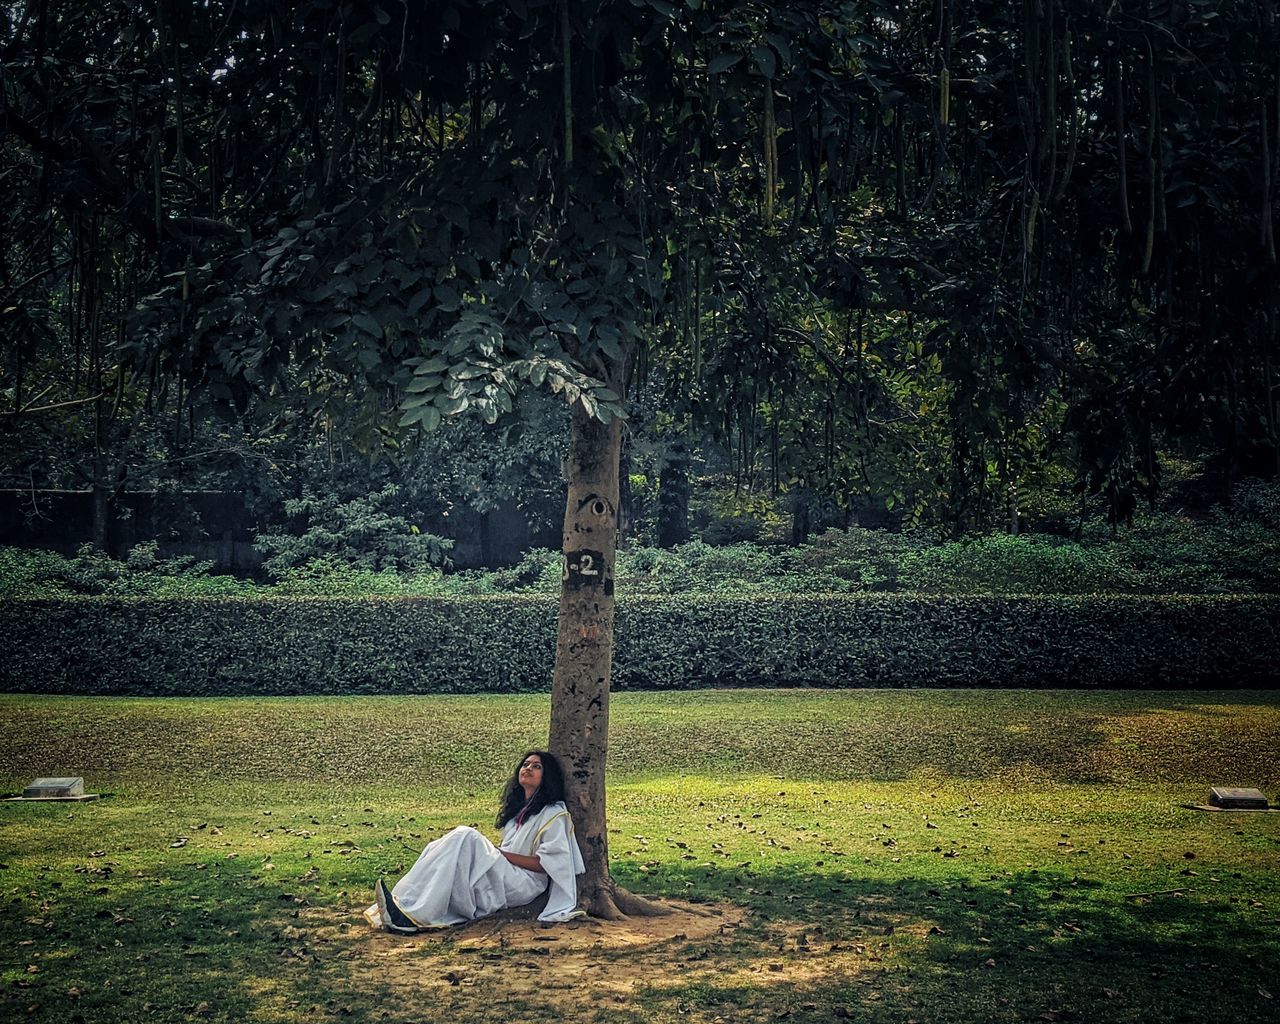 plant, tree, nature, real people, one person, land, sitting, leisure activity, casual clothing, lifestyles, field, growth, full length, day, men, tree trunk, grass, trunk, park, outdoors, human arm